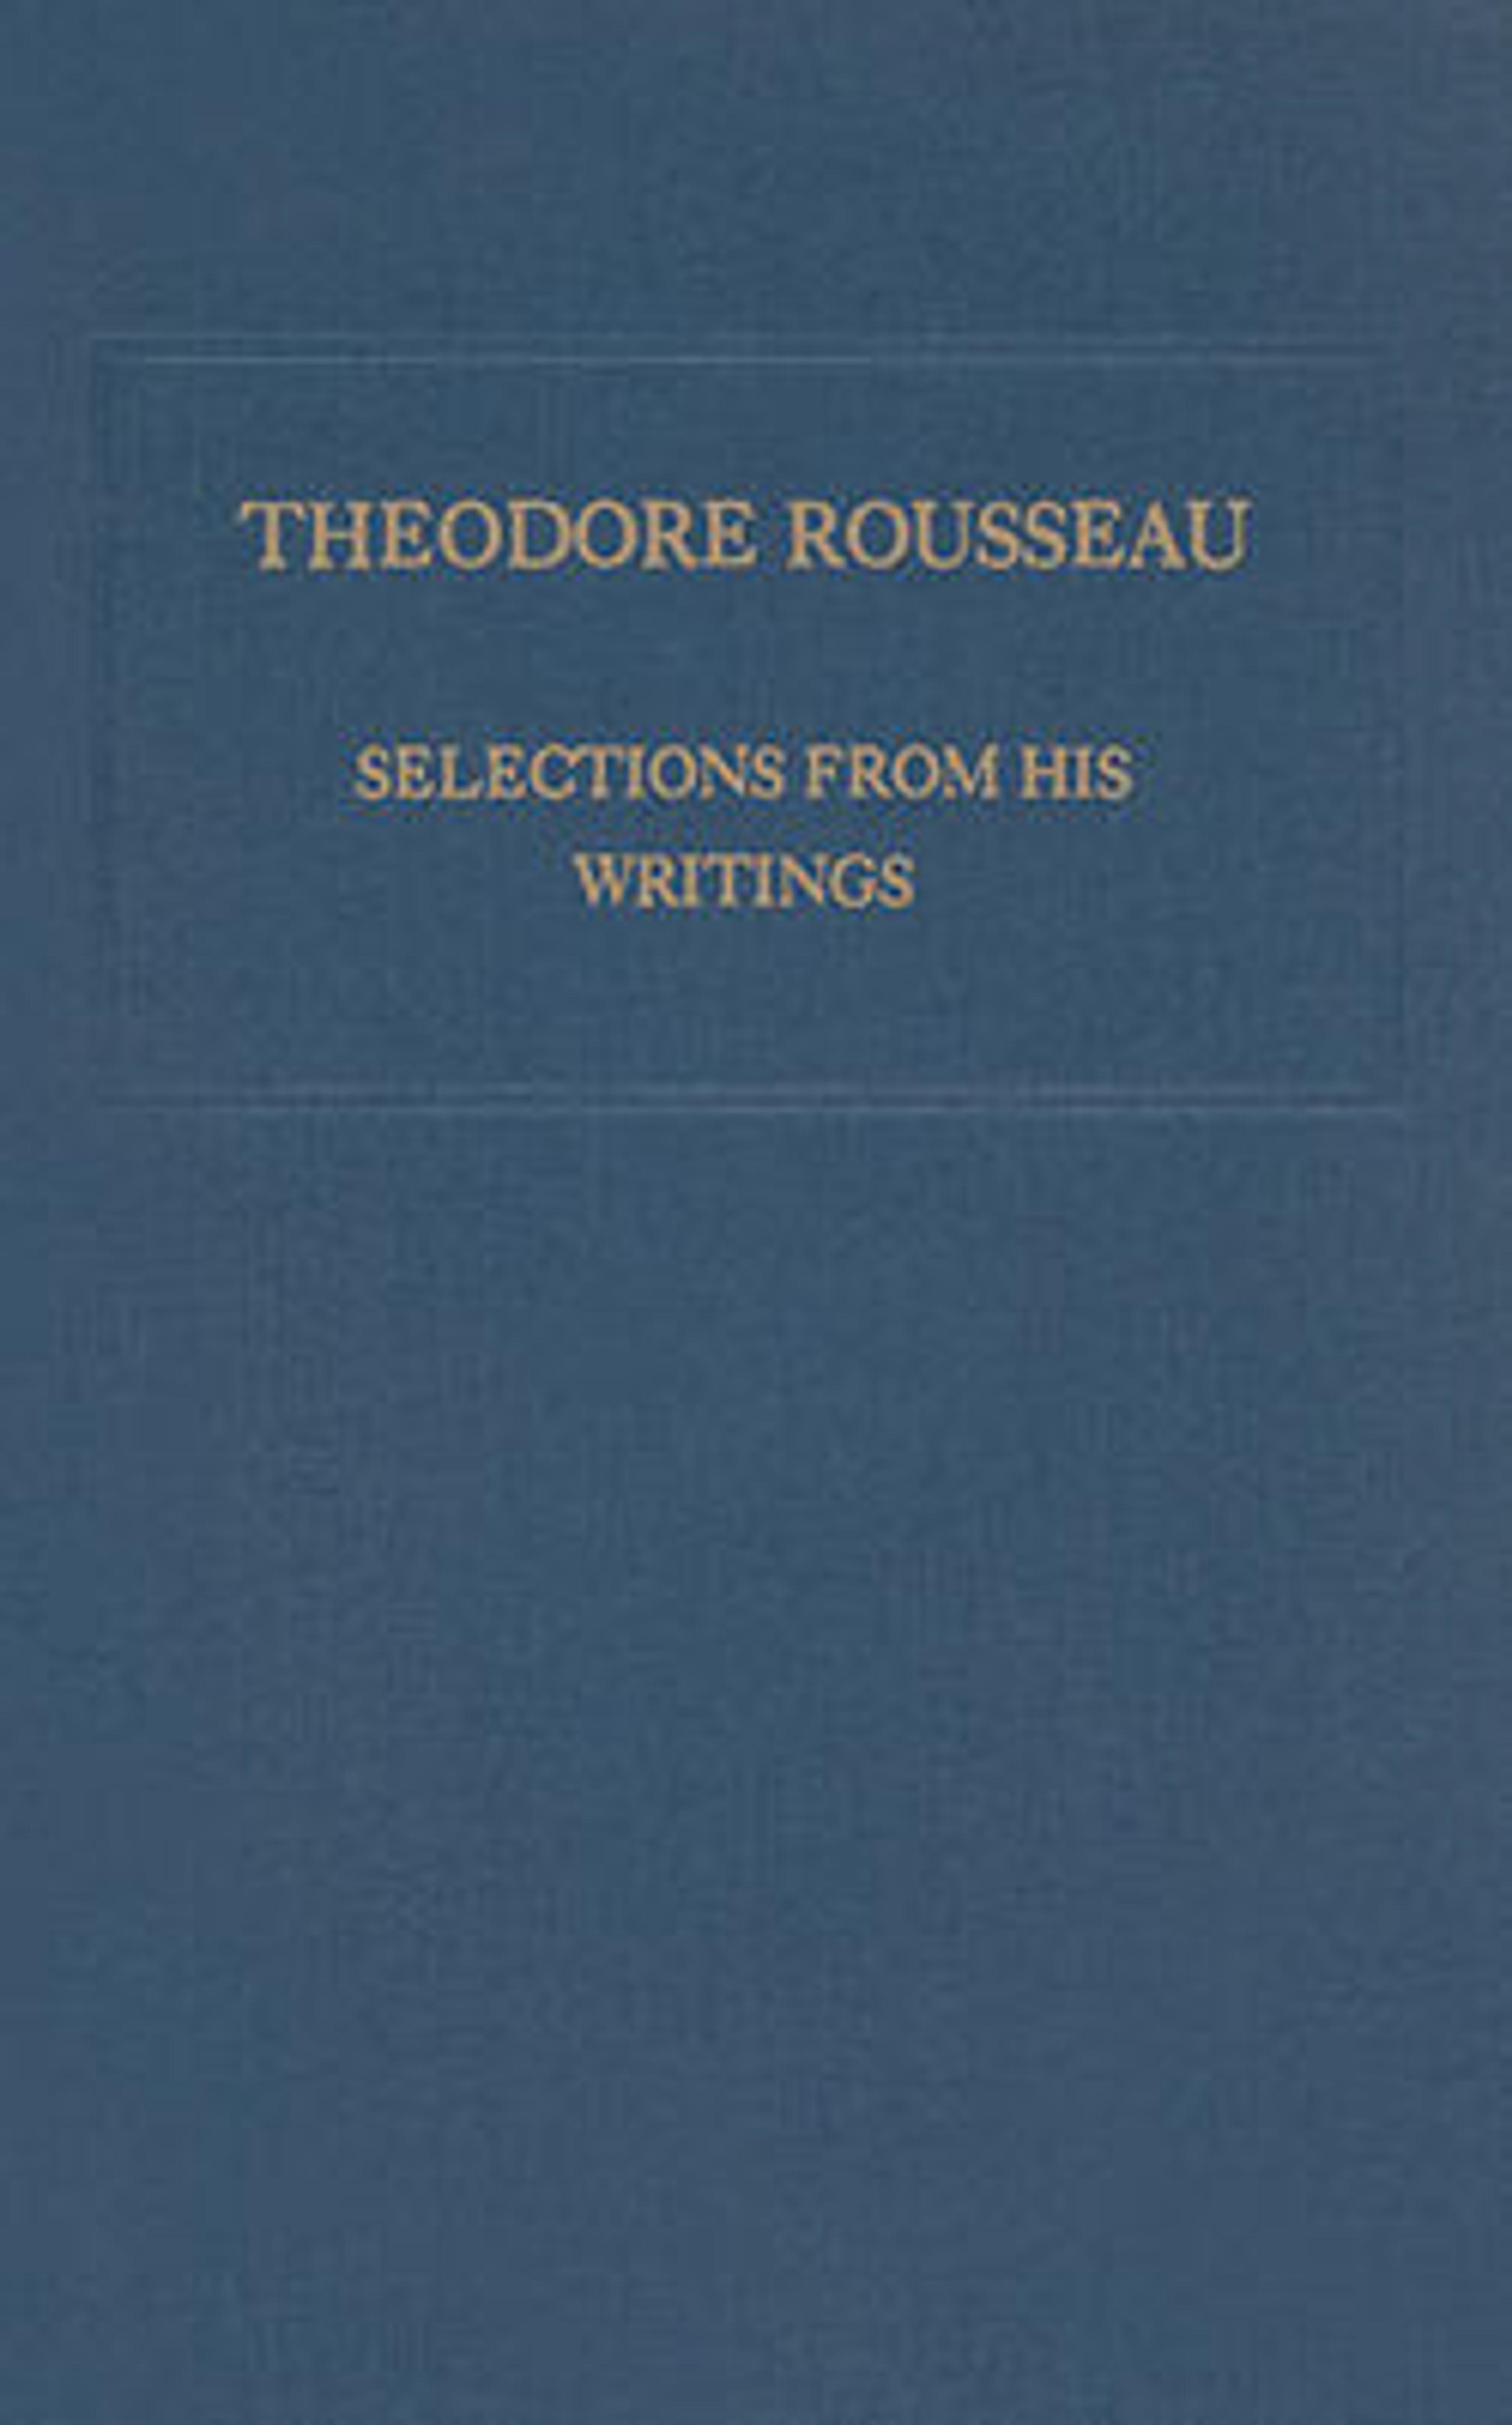 Theodore Rousseau: Selections from His Writings